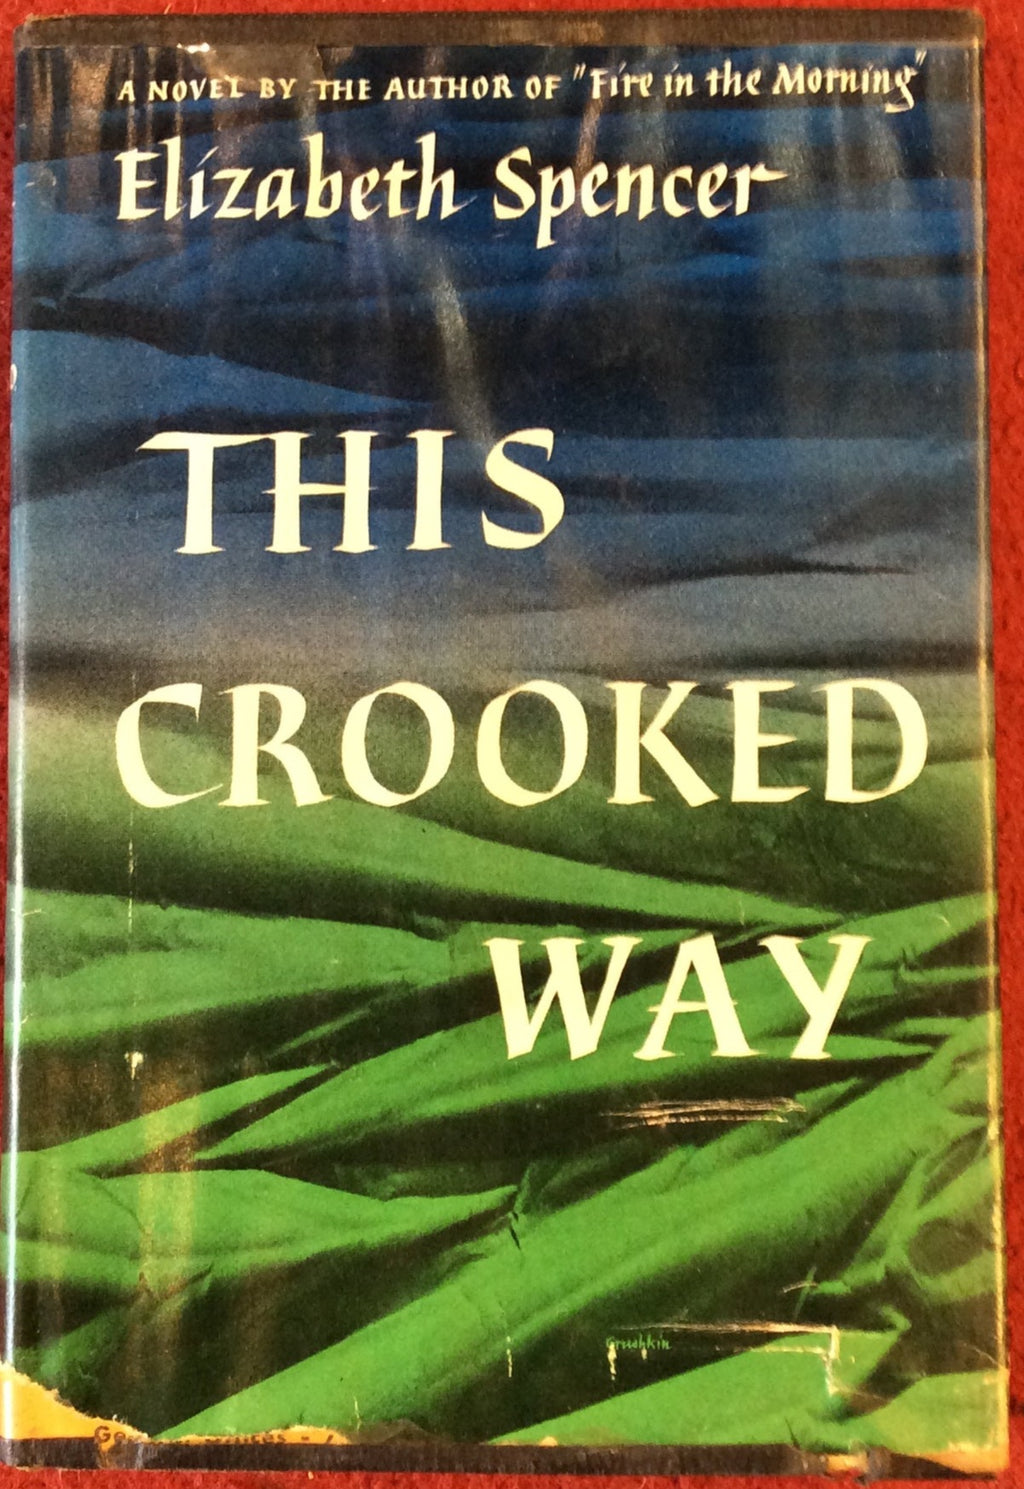 This Crooked Way, Elizabeth Spencer, Dodd, Mead & Co., 1952 *